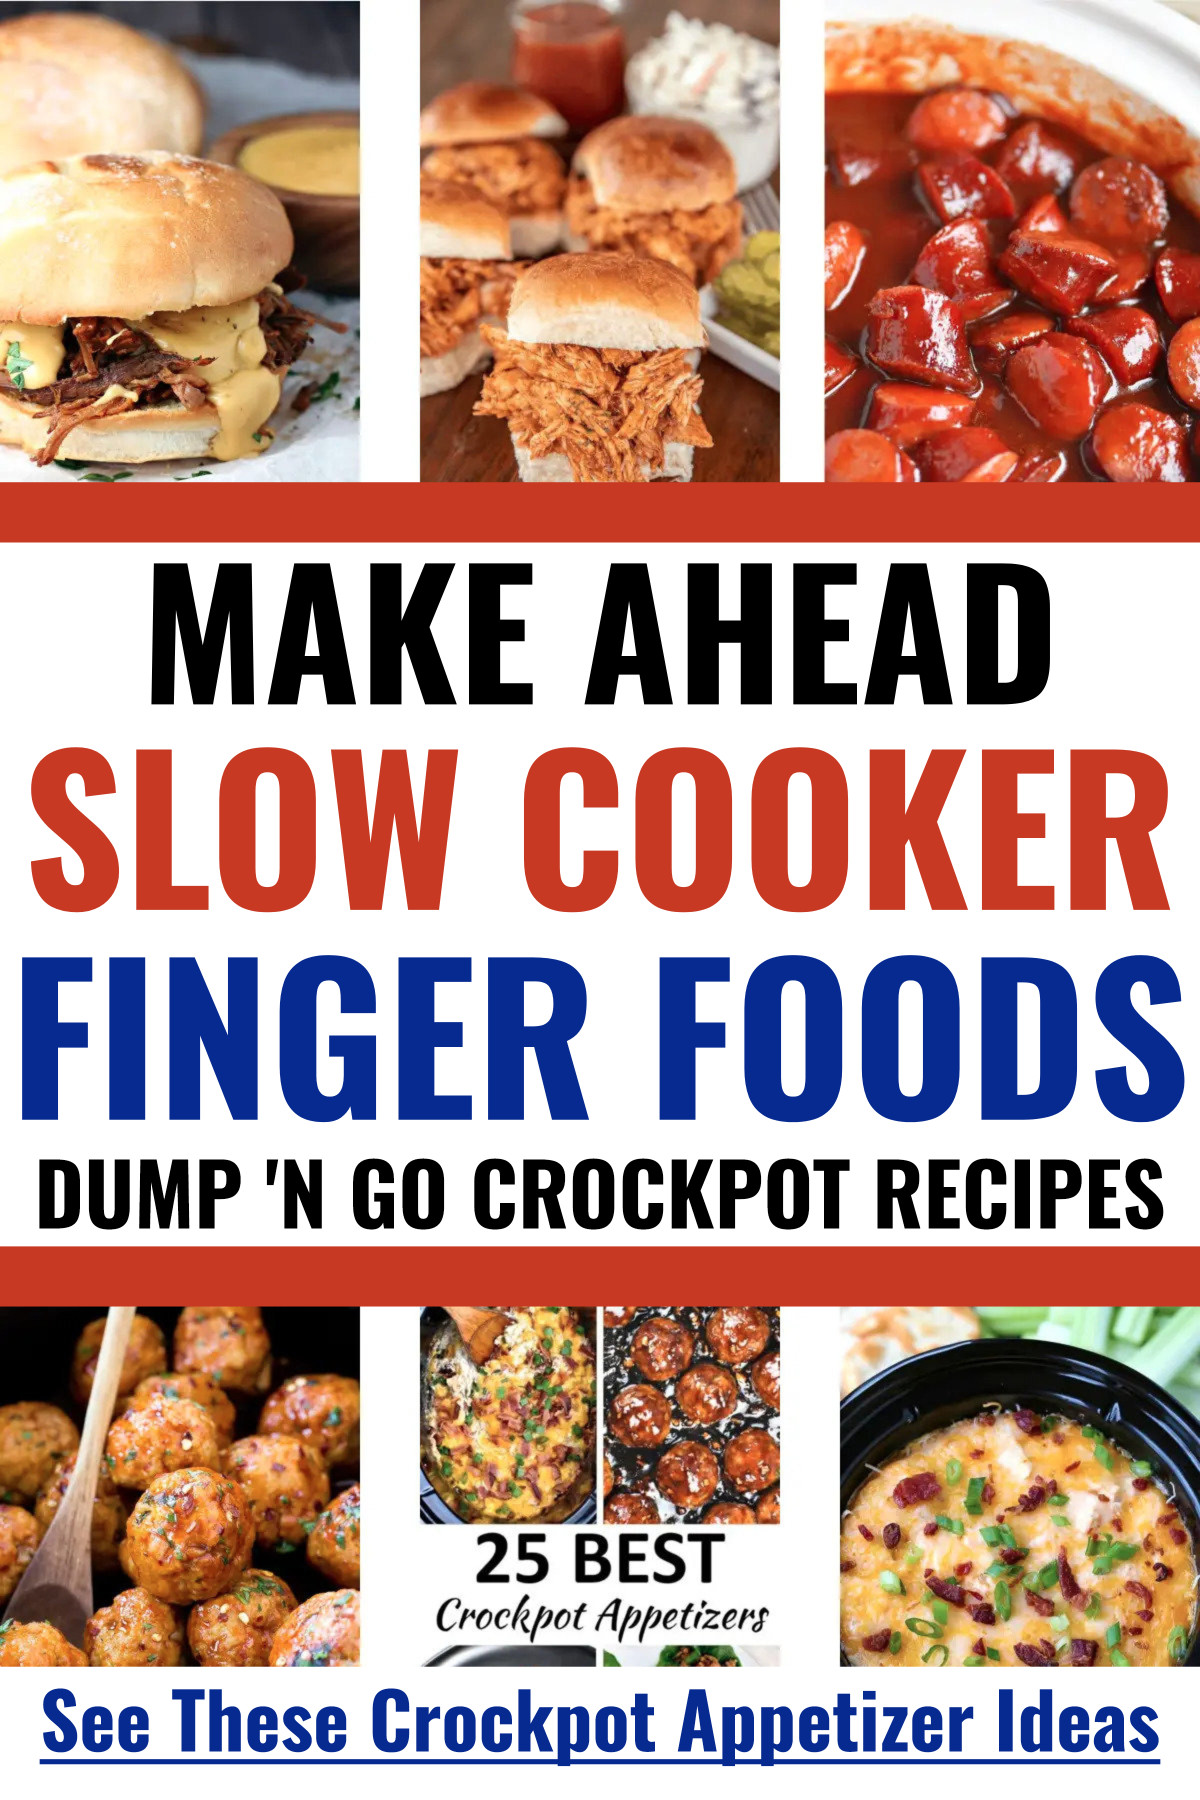 Crockpot appetizers for party platters